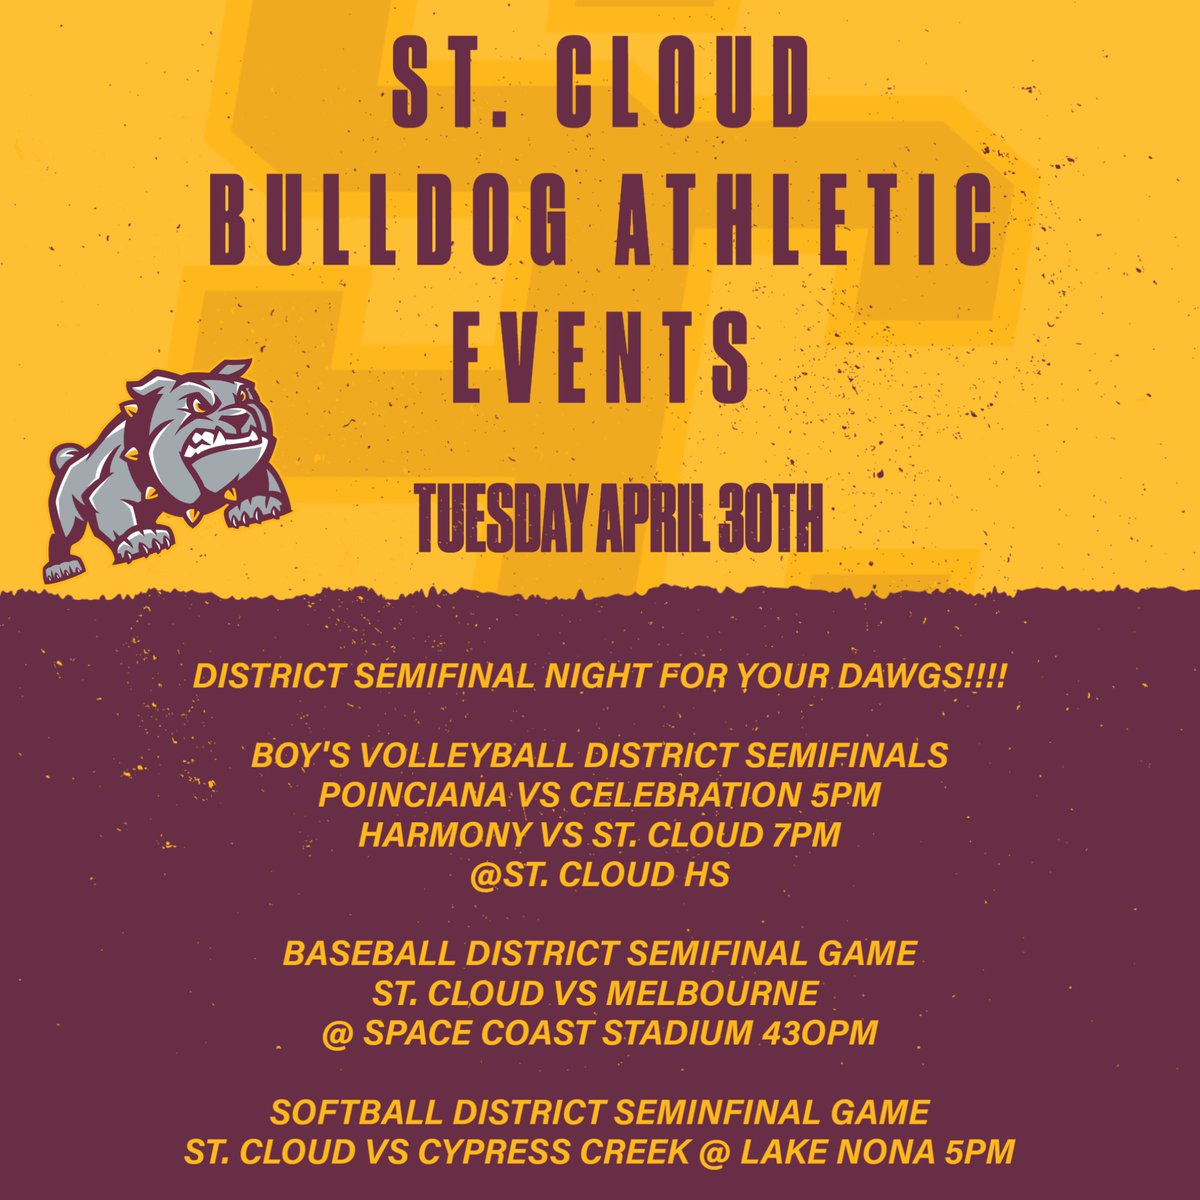 District Semi Finals for Boy's Volleyball, Softball and Baseball. Good luck to all. Let's take care of business and make it to Thursday!!! Go Dawgs!!!